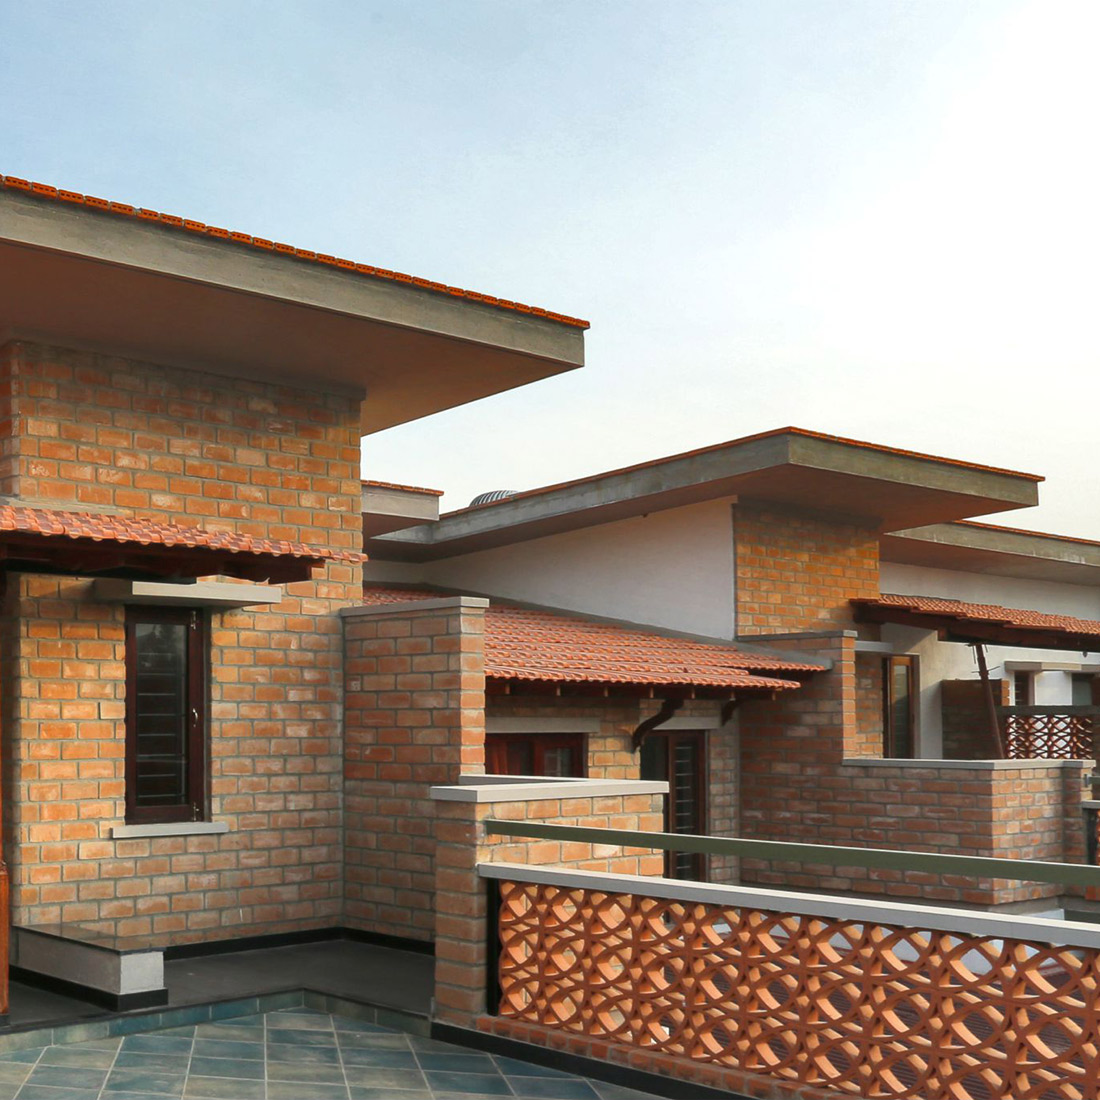 The RCC roof is cladded with hollow terracotta tiles to keep the inside of the house cool.